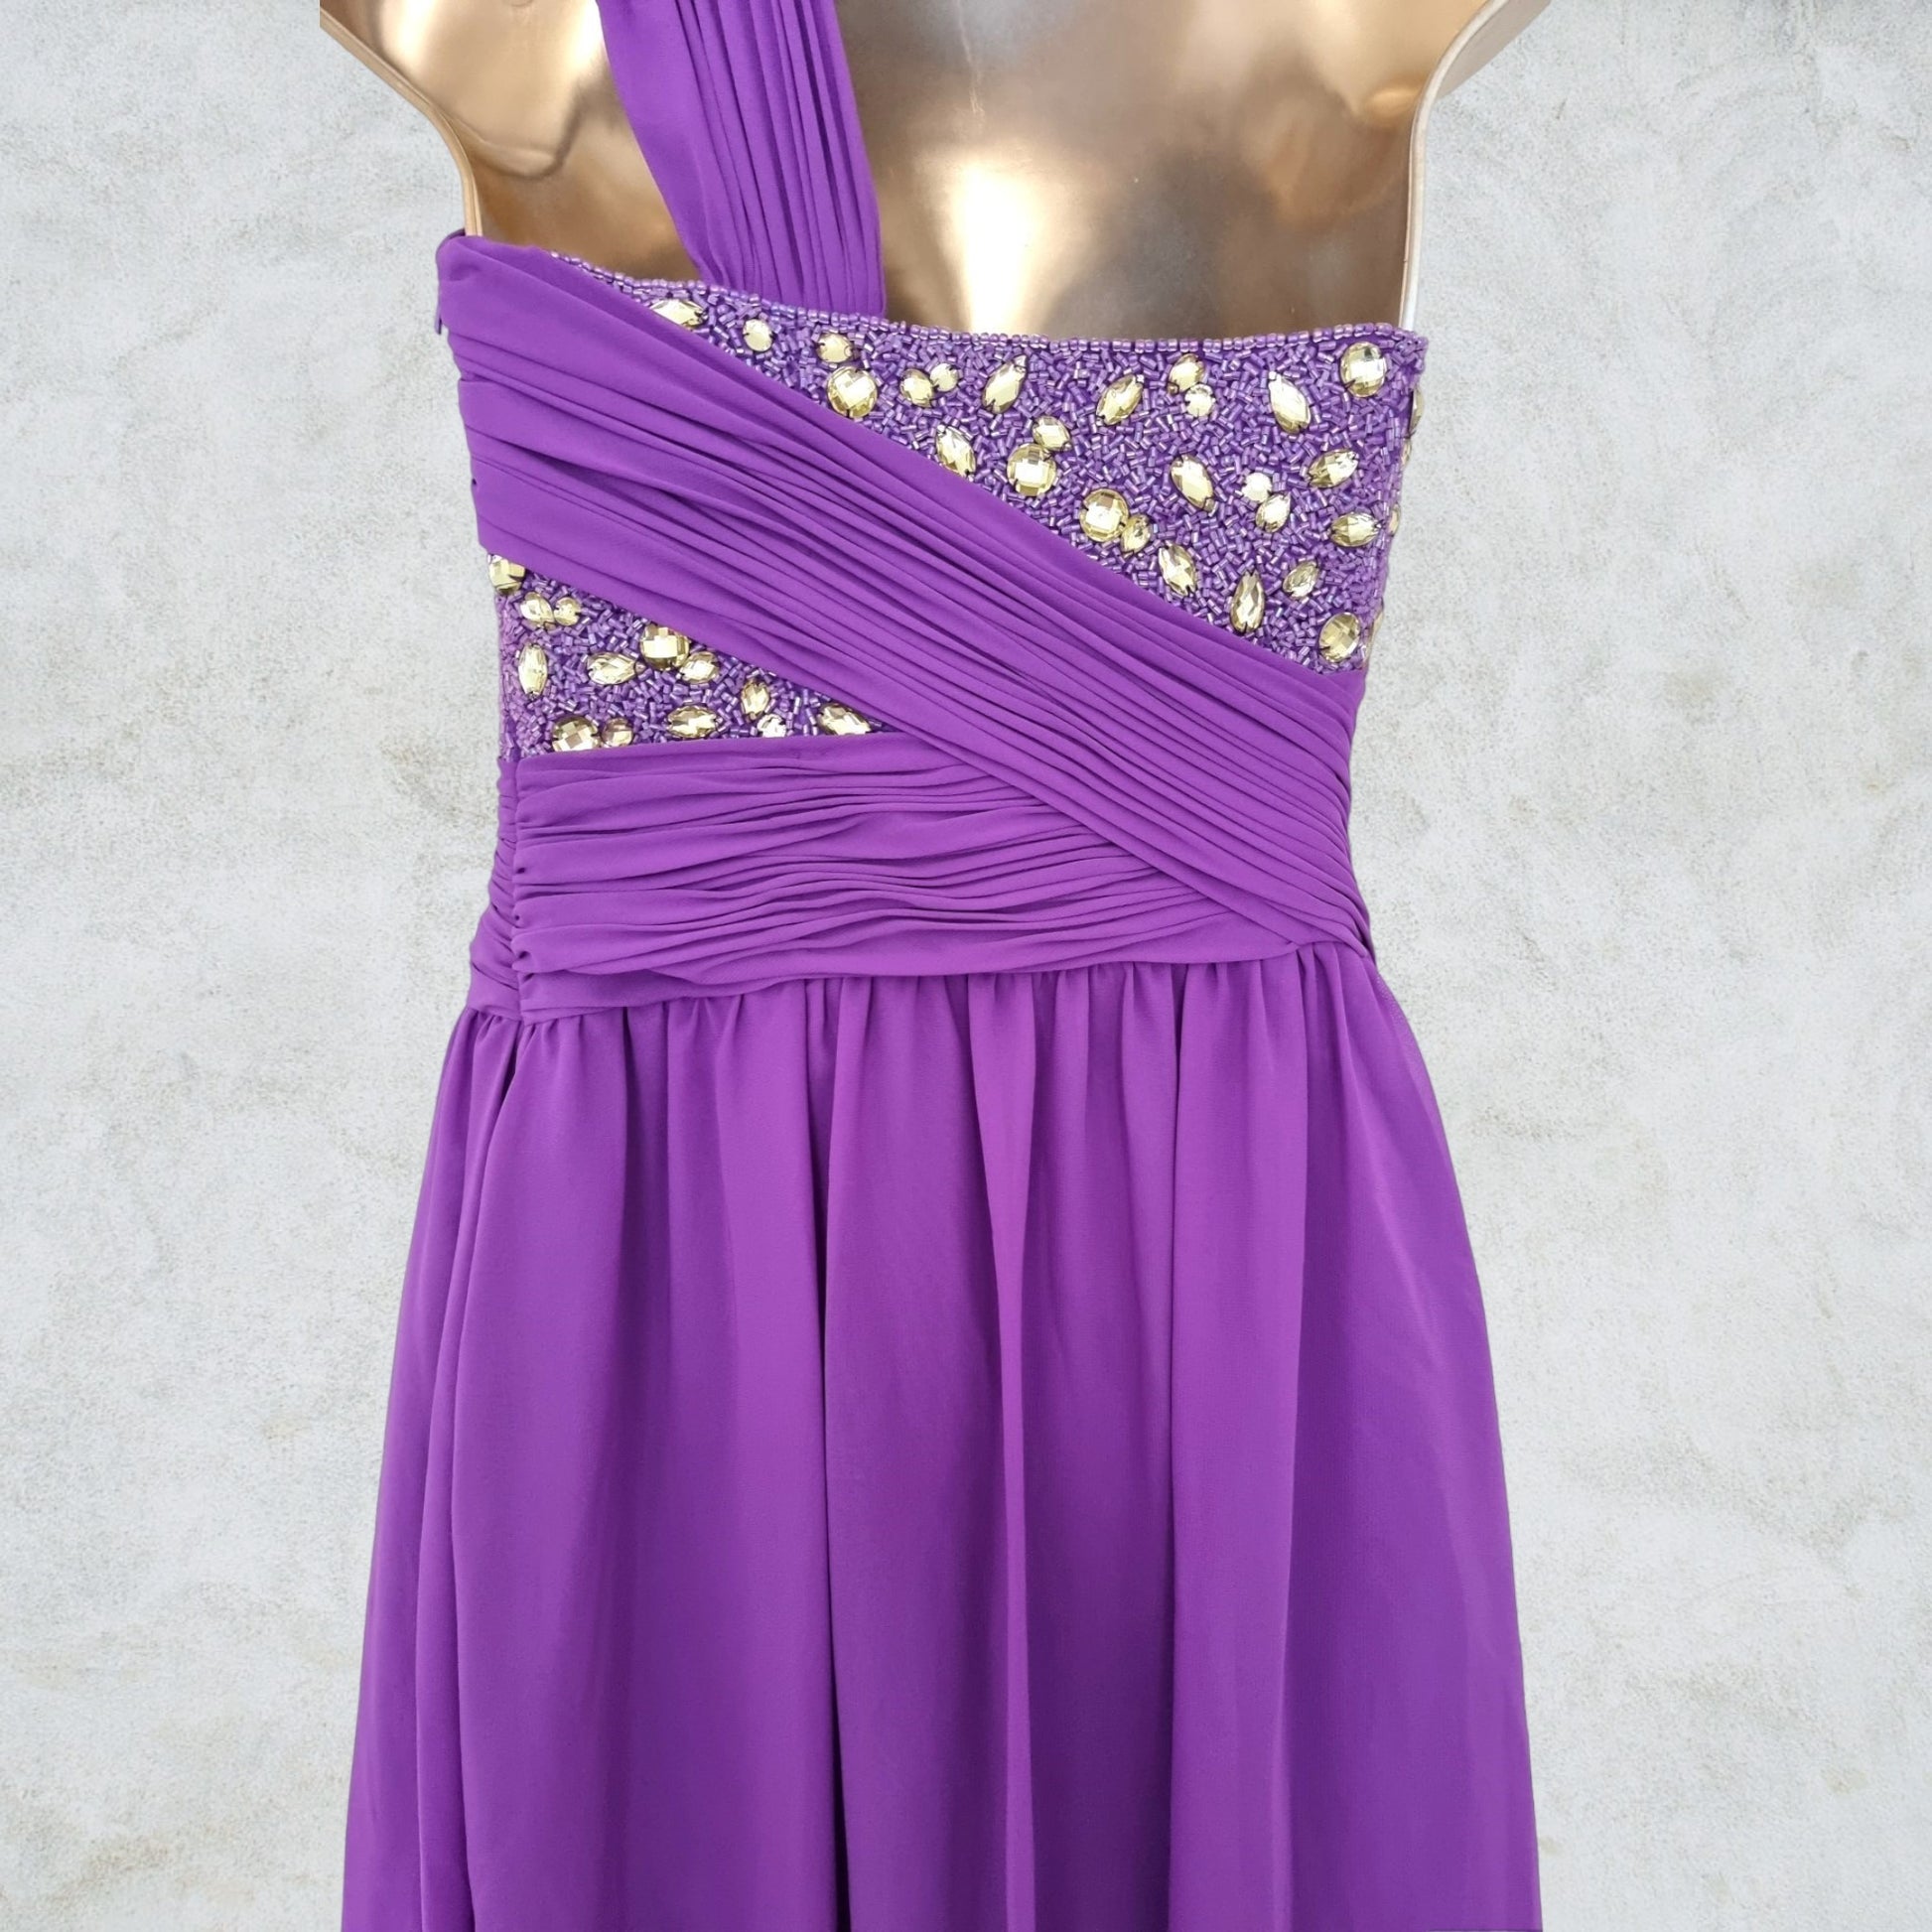 Amore Women’s Purple Long Special Occasion Prom Dress UK 8 US 4 EU 36 Timeless Fashions